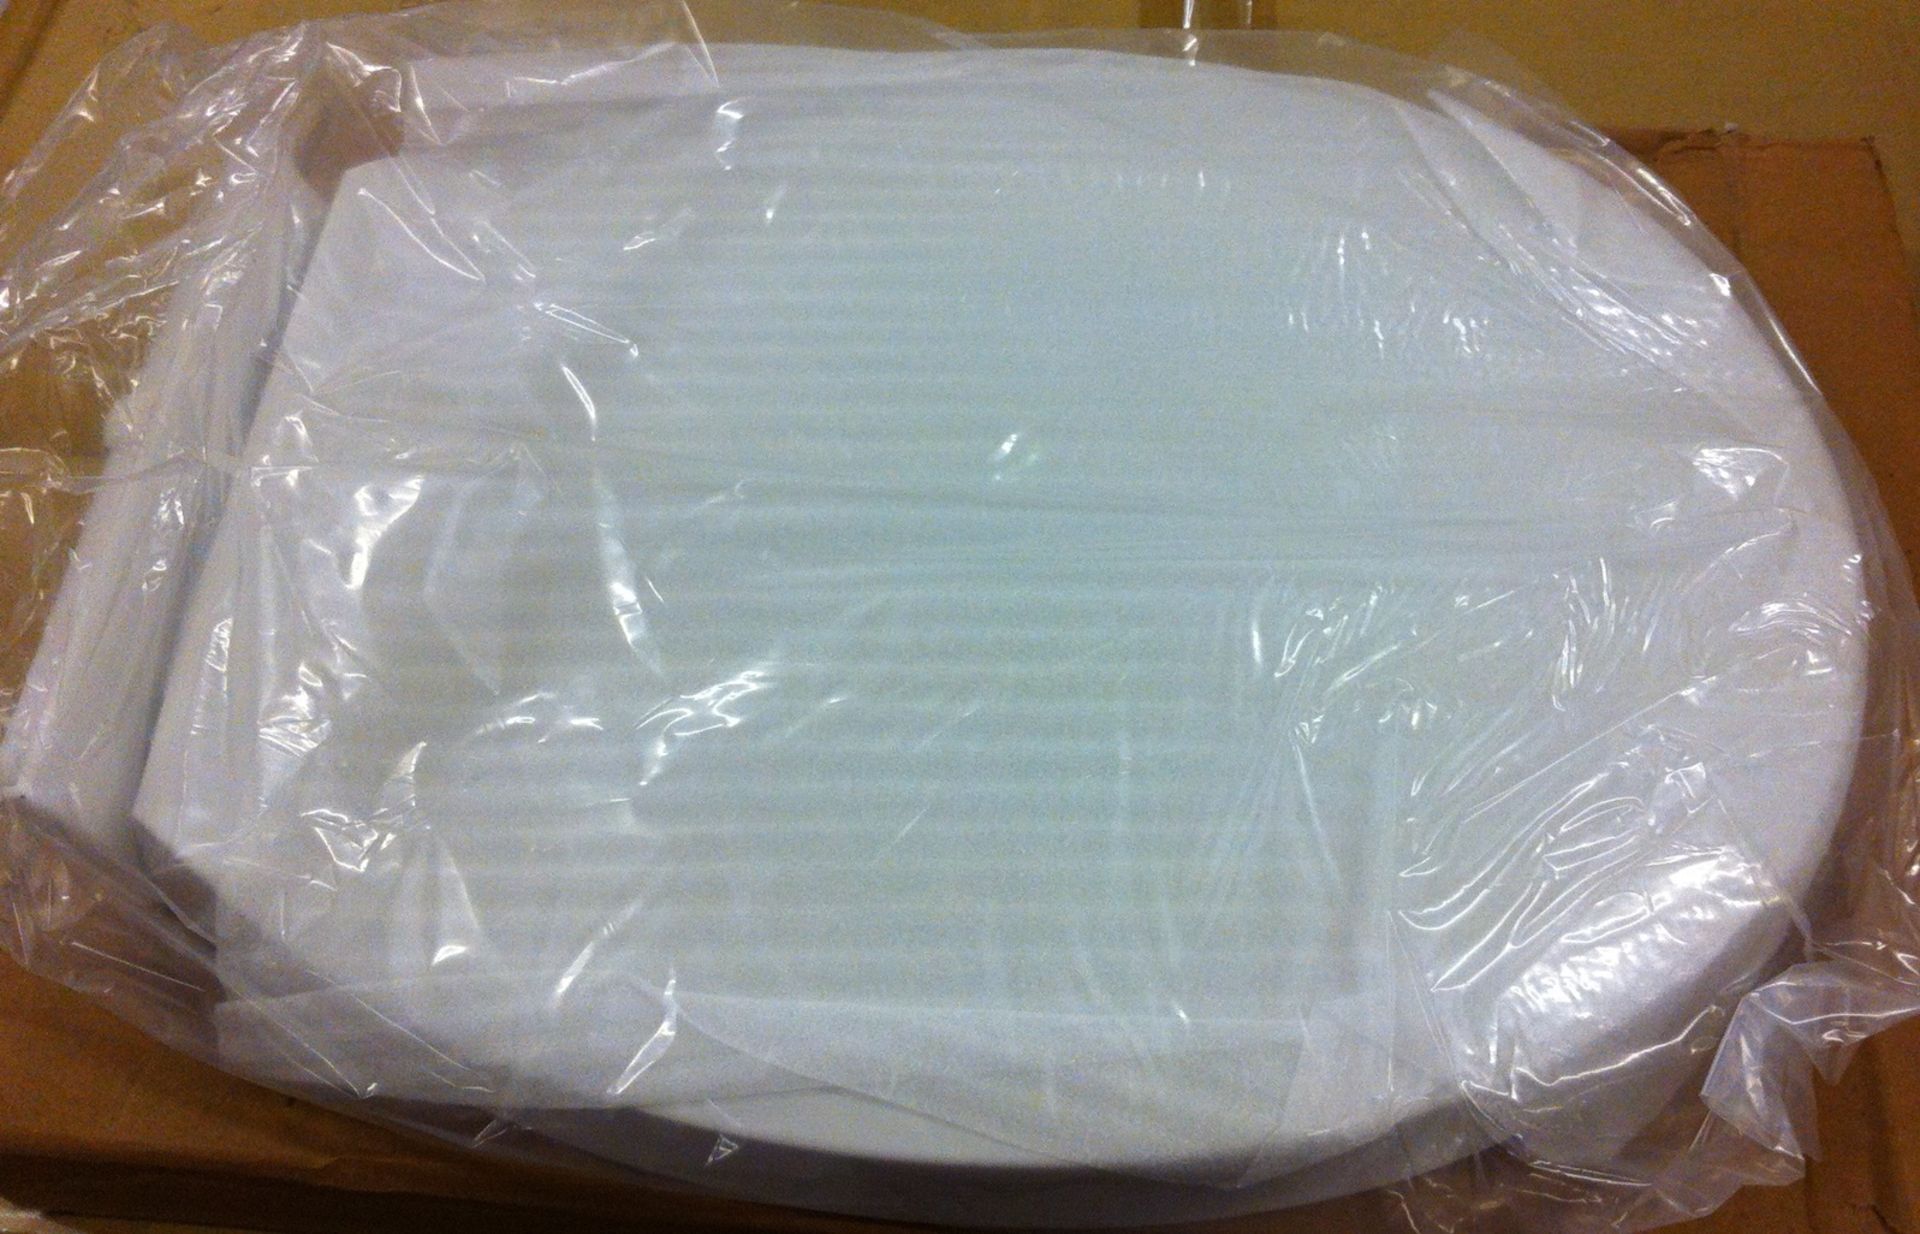 10 x Deluxe Soft Close White Toilet Seats - Brand New Boxed Stock - CL034 - Ideal For Resale - Vogue - Image 4 of 6